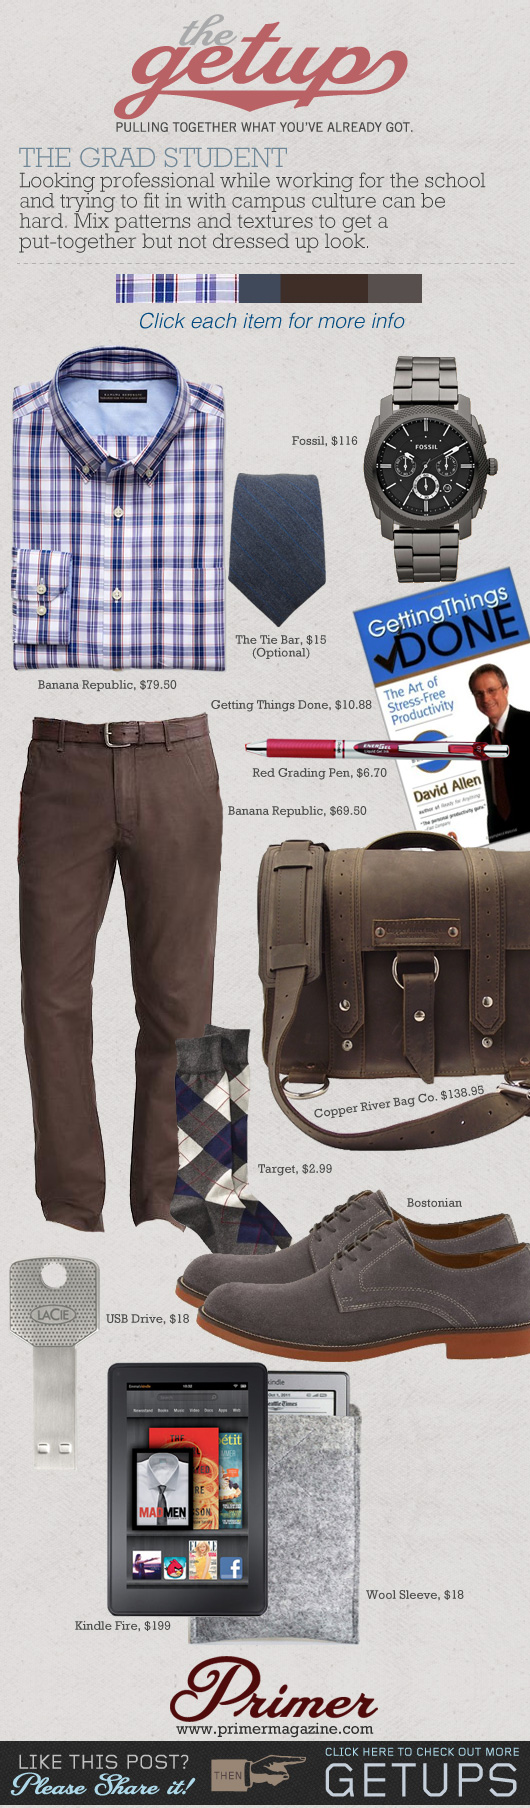 The Getup Grad Student - plaid shirt, brown pants, saddleback leather briefcase collage